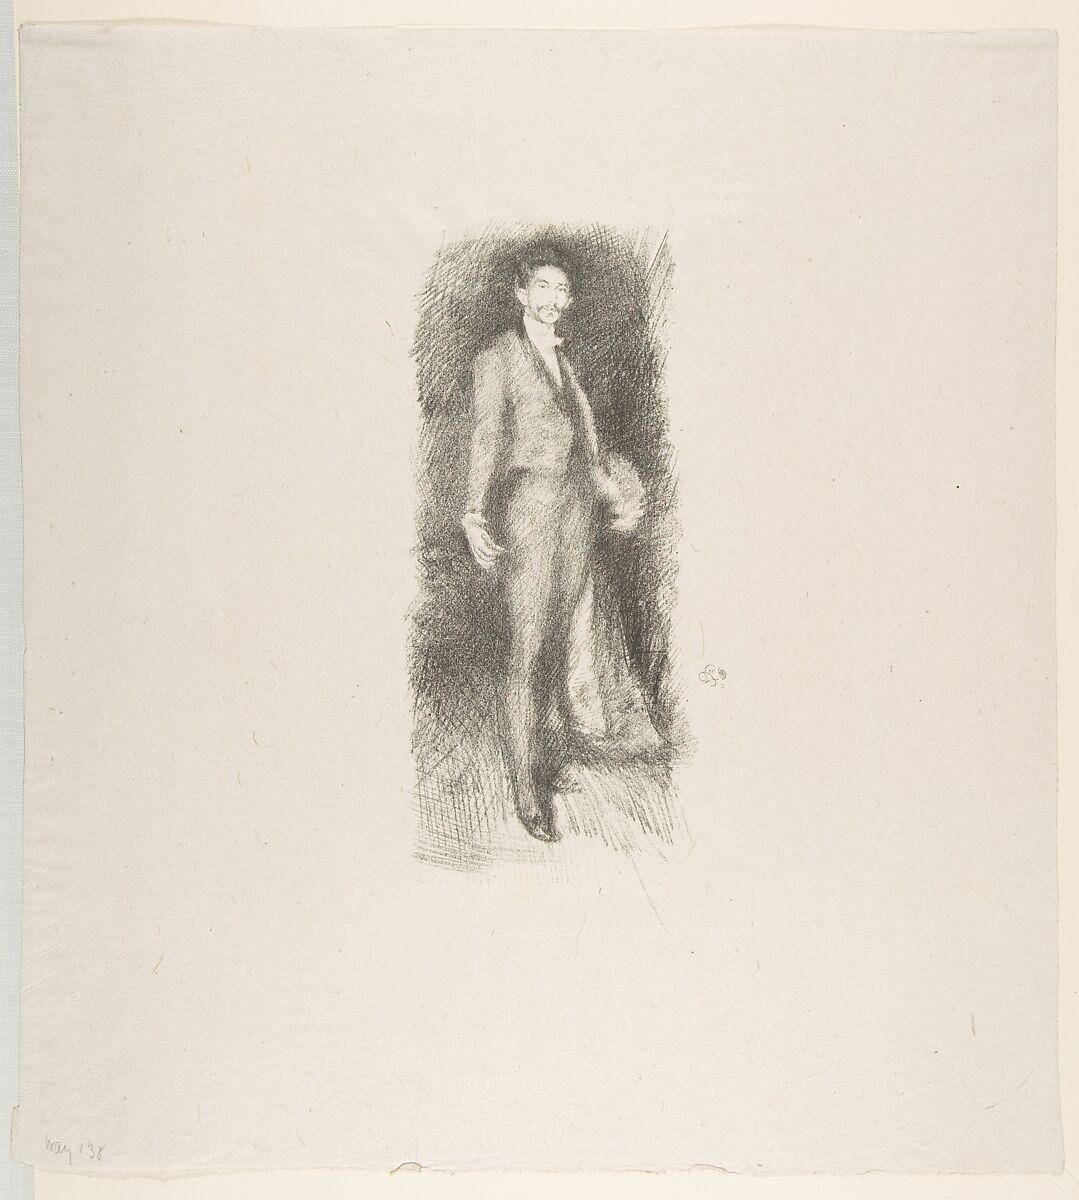 Count Robert de Montesquiou, No. 2, James McNeill Whistler (American, Lowell, Massachusetts 1834–1903 London), Transfer lithograph with scraping, drawn on thin transparent transfer paper; only state (Chicago); printed in black ink on grayish ivory China paper 